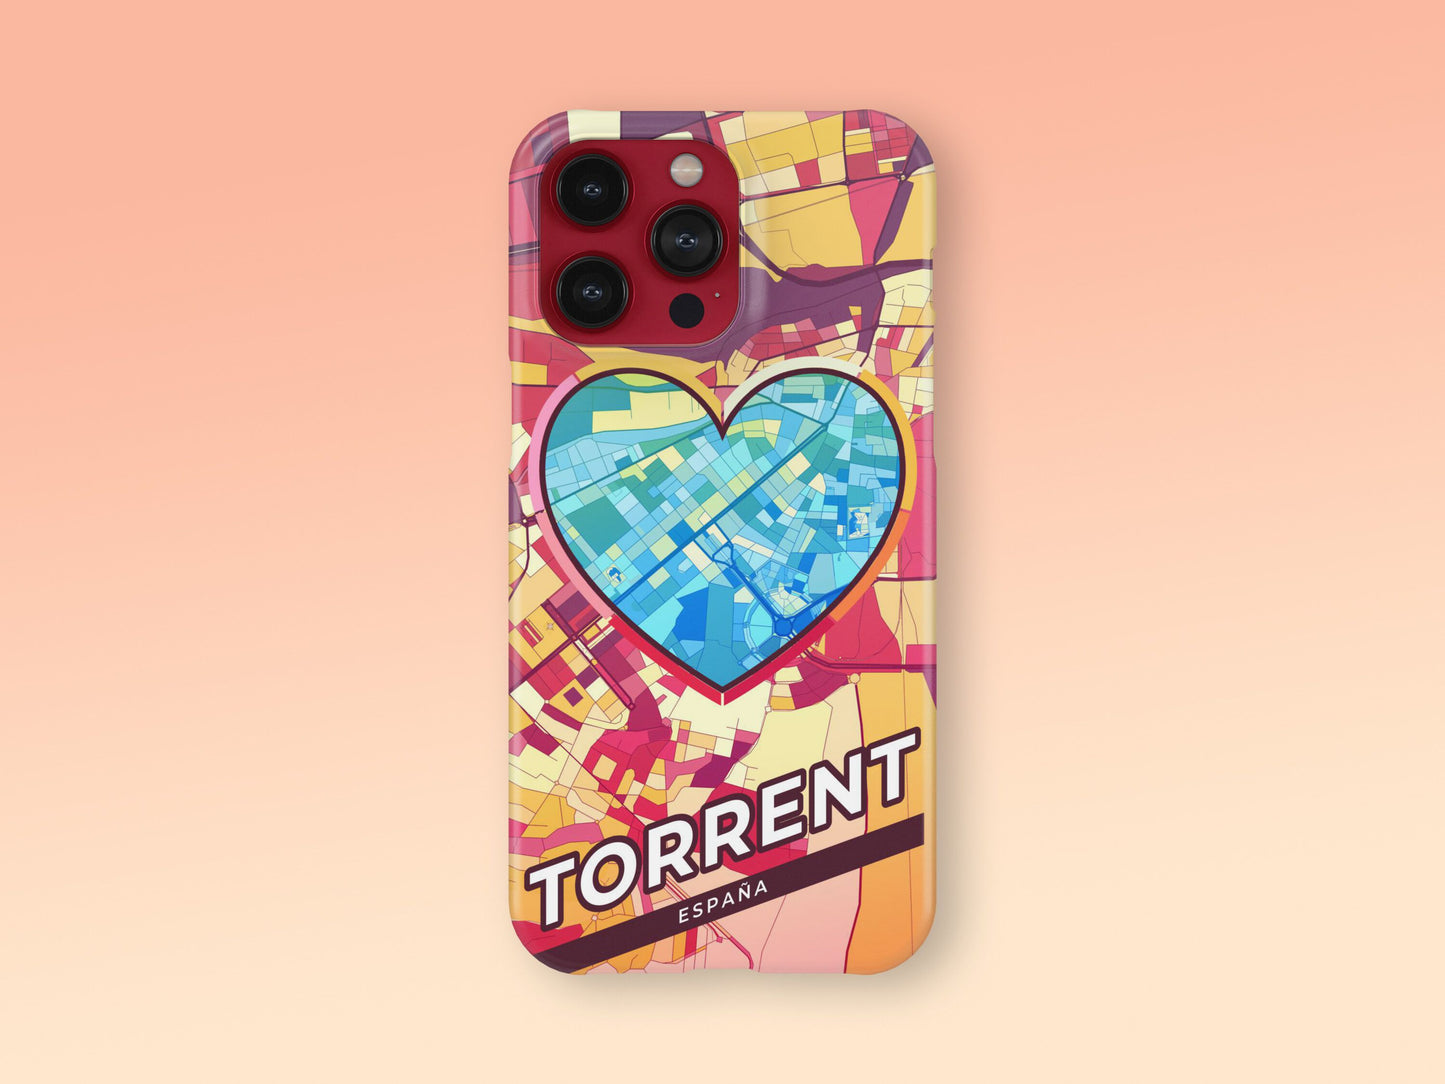 Torrent Spain slim phone case with colorful icon 2